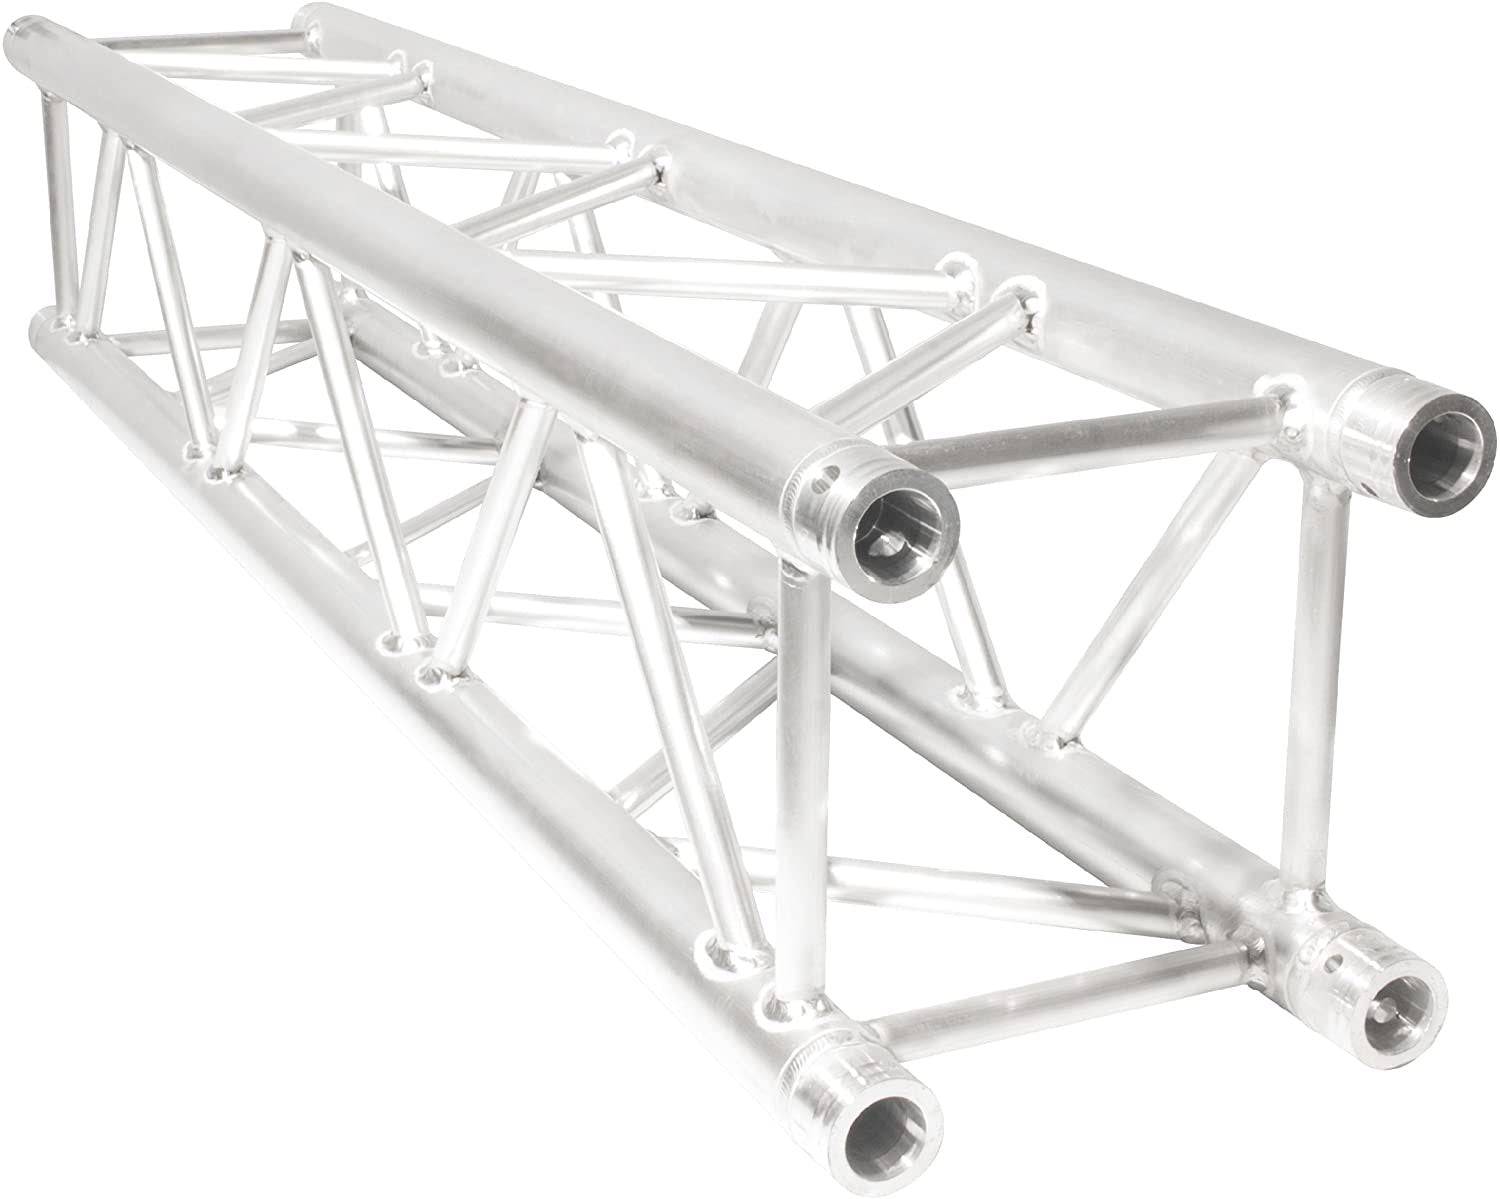 Chauvet Trusst CT290-415S 12 inches Box Truss, Straight Section - 1.5 Meters - Hollywood DJ